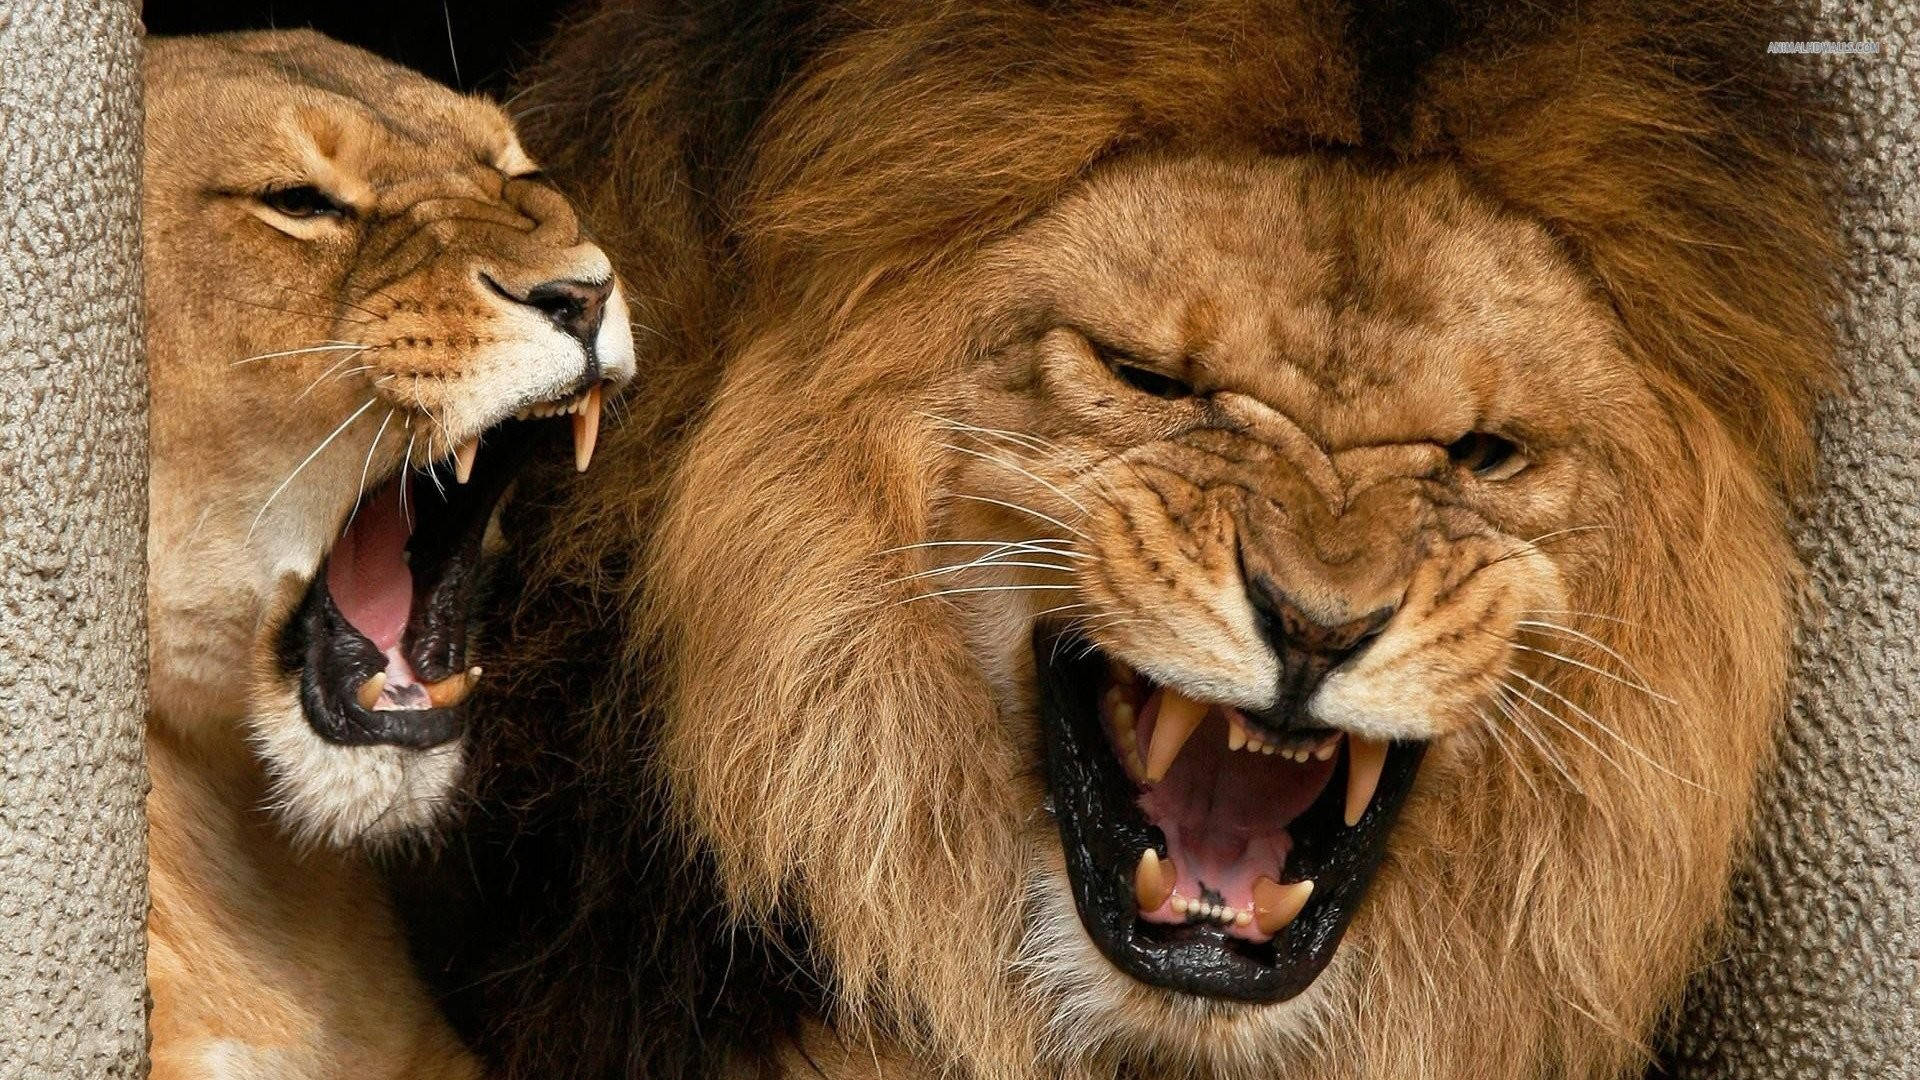 Roaring Angry Lions Wallpaper